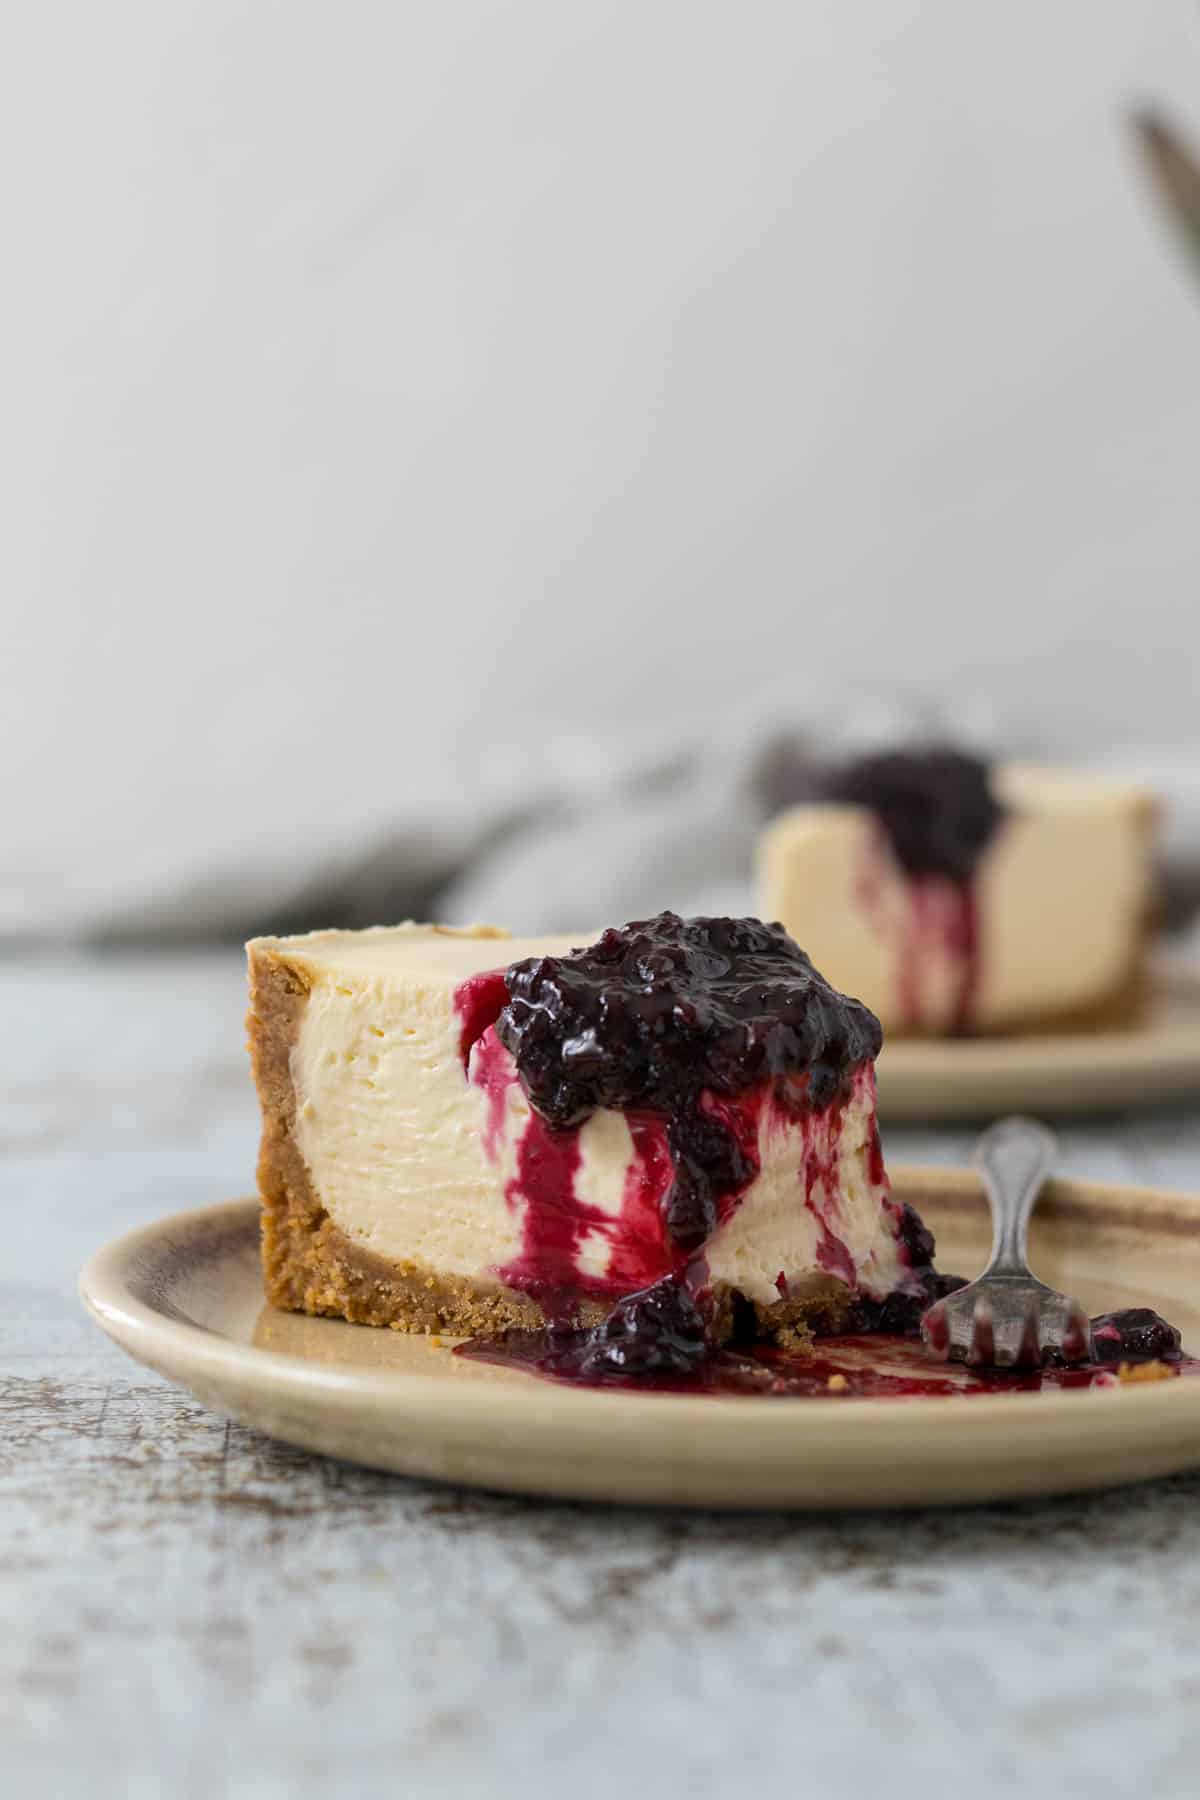 Slice of no-bake cheesecake on a plate with a berry compote.